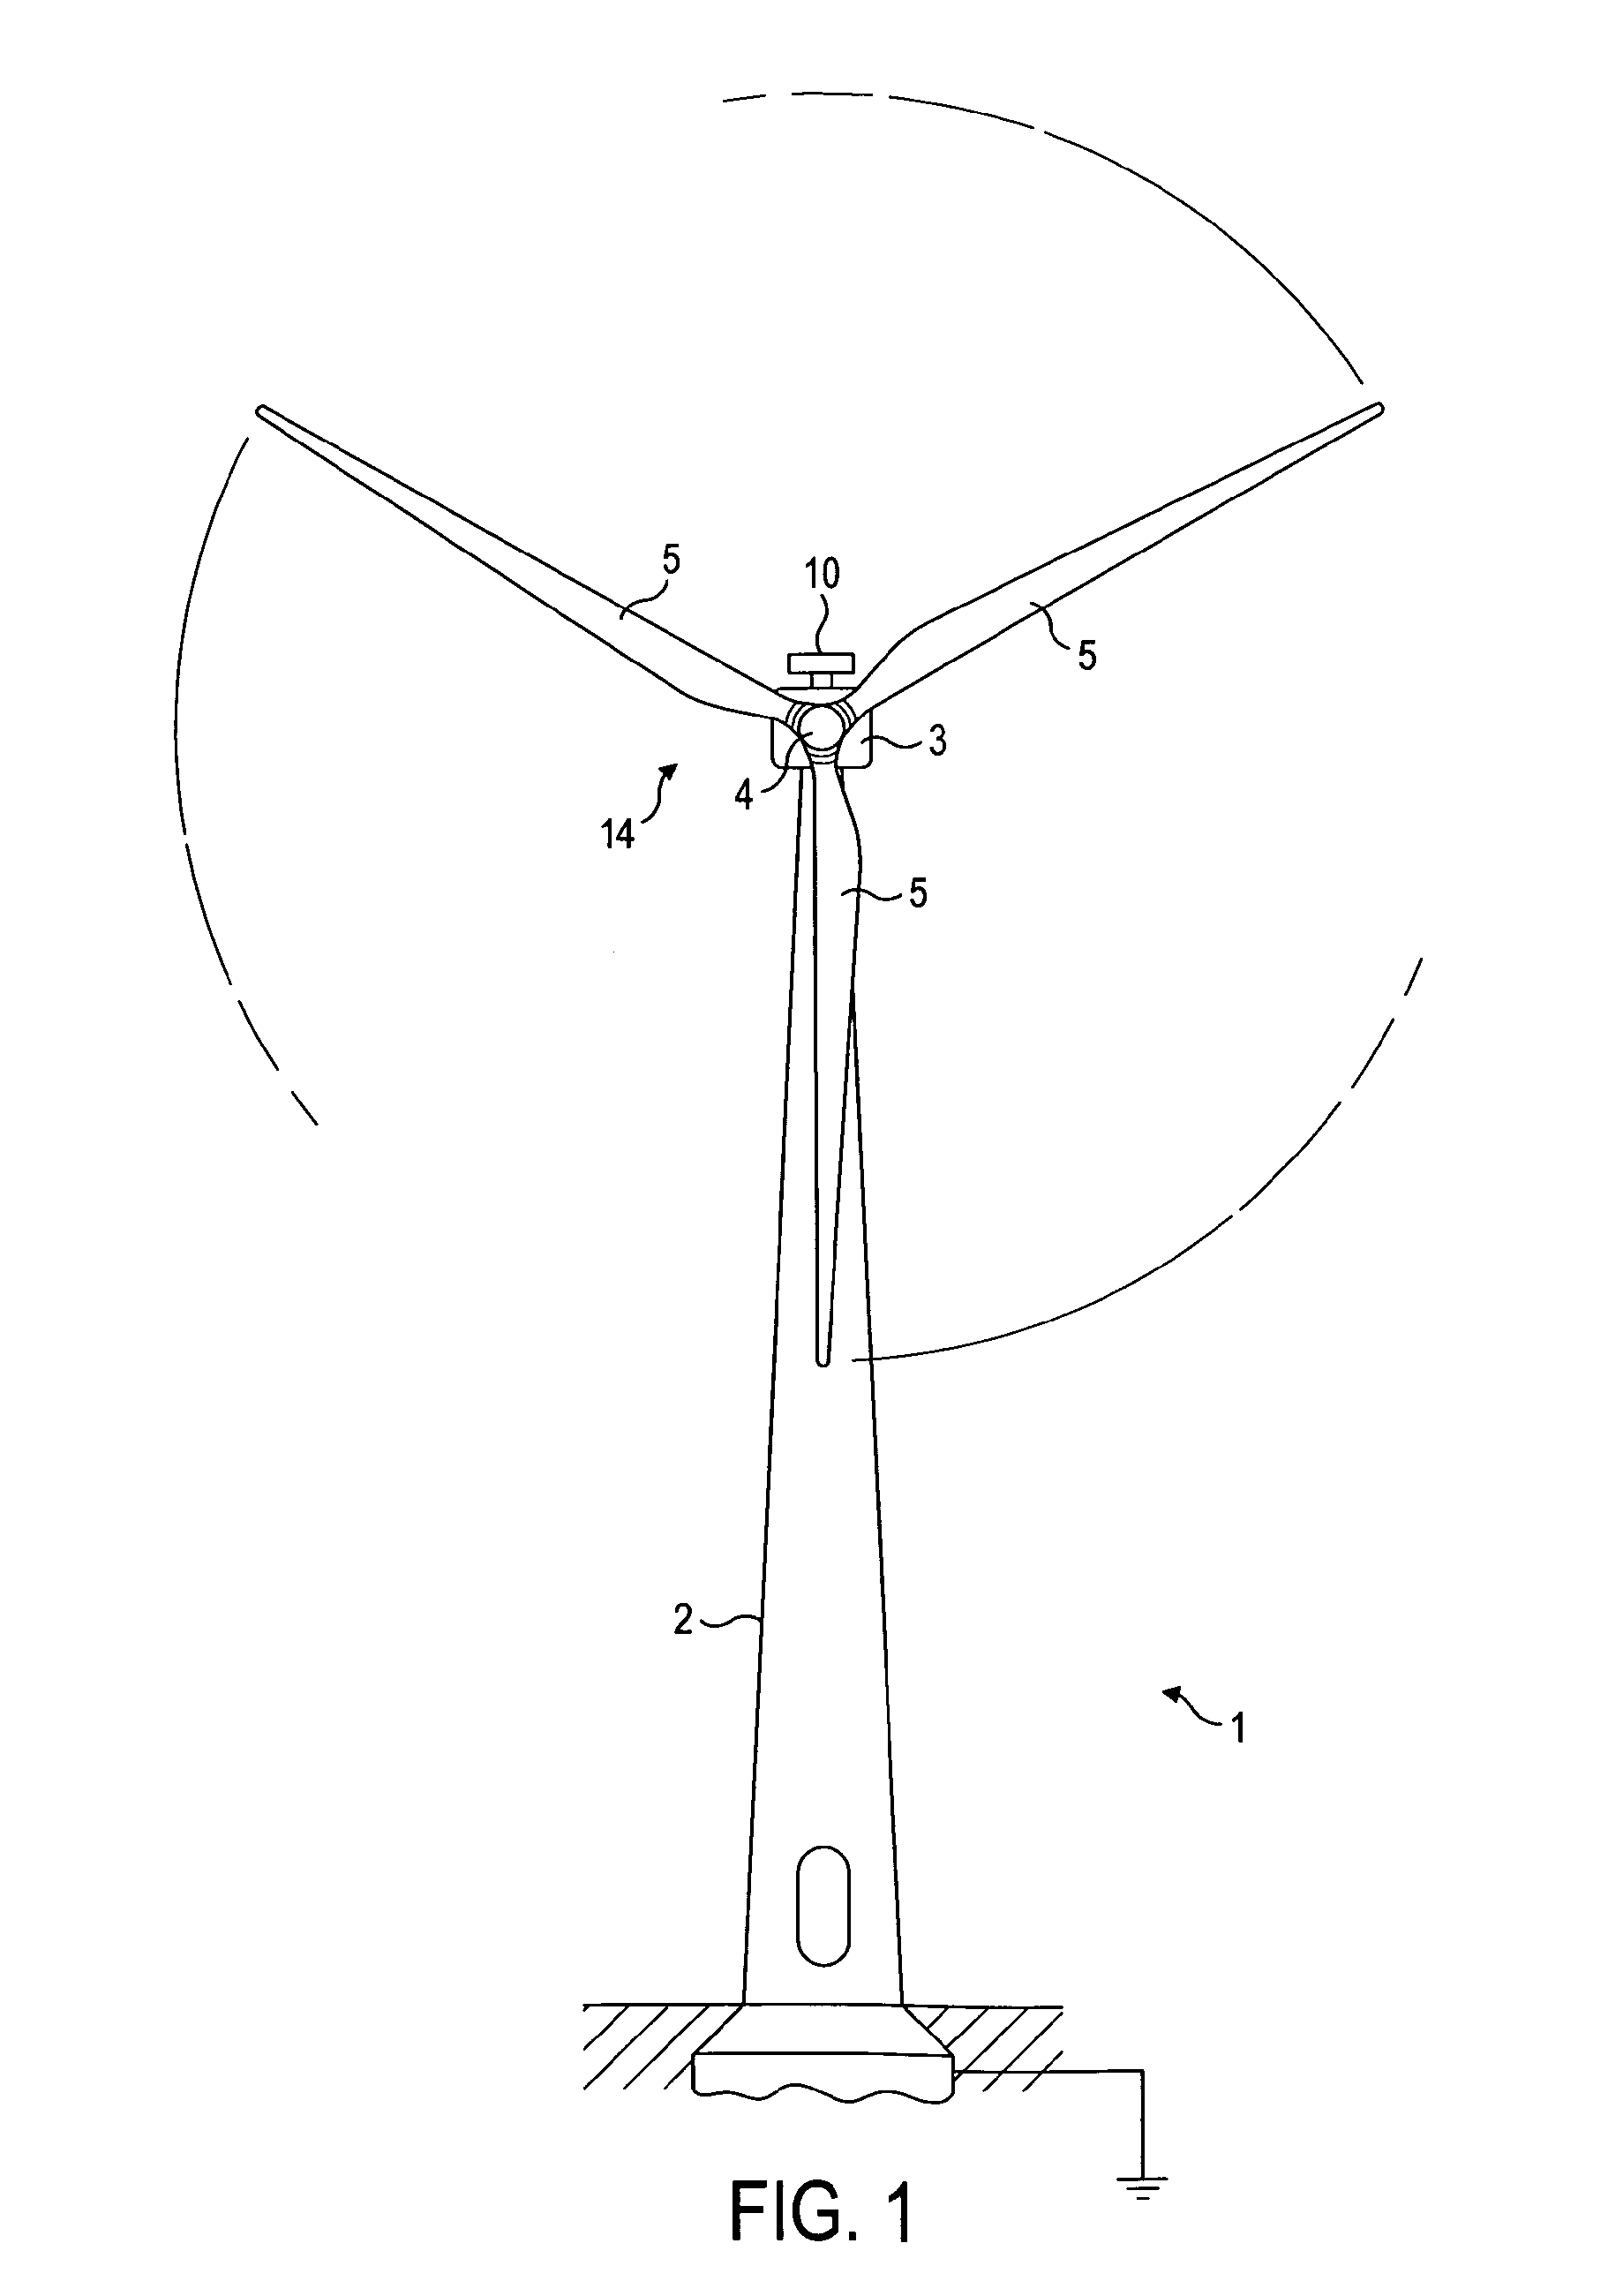 Method and apparatus for protecting wind turbines from fatigue damage